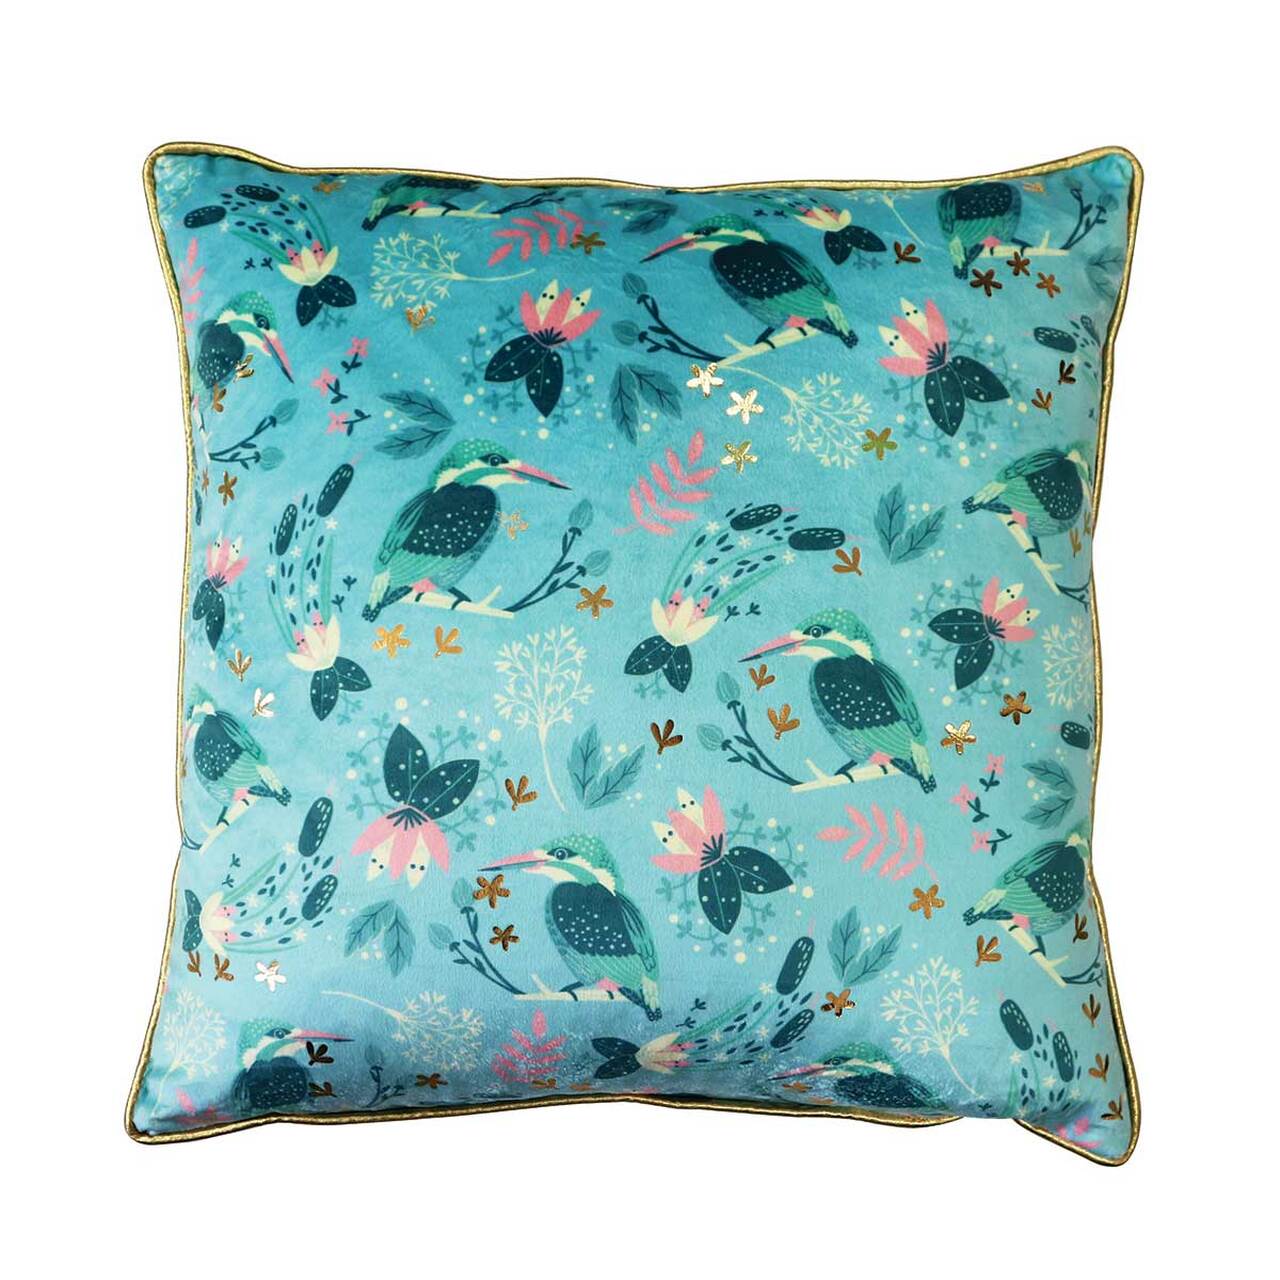 Tipperary Crystal Kingfisher Tipperary Birdy Cushion  New to the Tipperary Crystal Birdy Collection, this plush, feather filled 45cm velvet cushion features the exquisite Kingfisher illustration and will make a bright and colourful statement in any home.